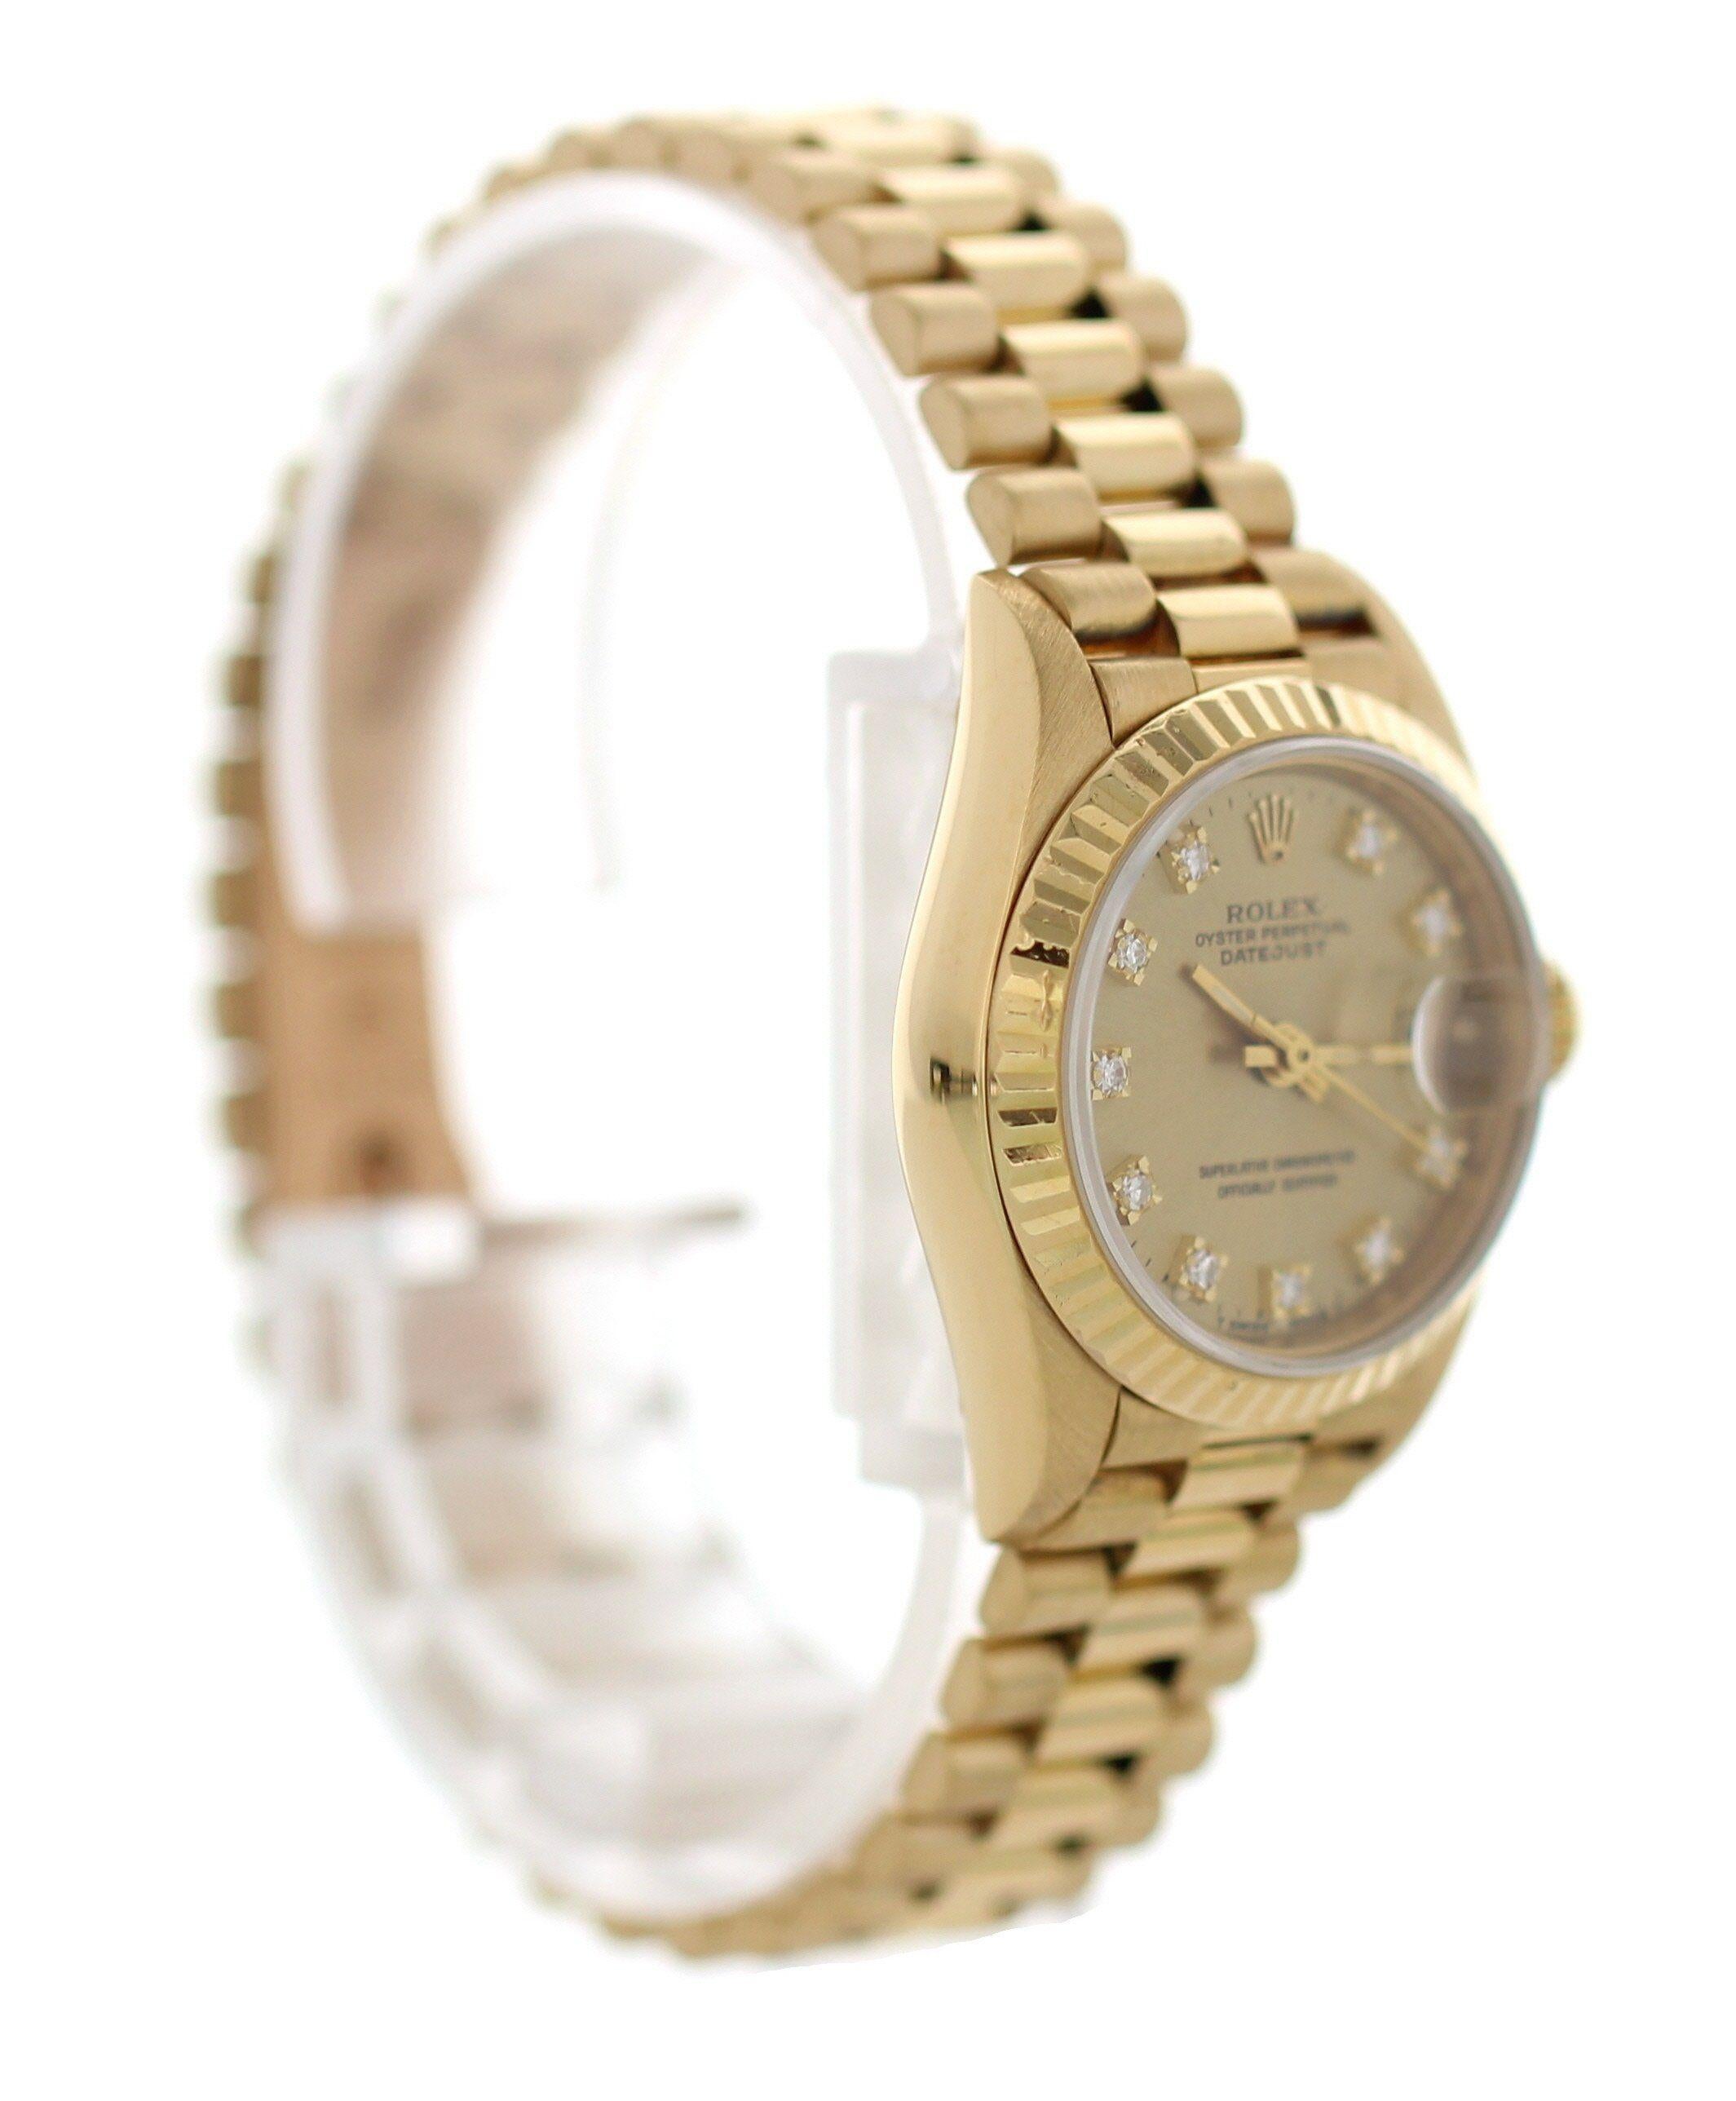 Rolex Datejust Diamond Dial 69178 Yellow Gold Ladies Watch In Excellent Condition For Sale In New York, NY